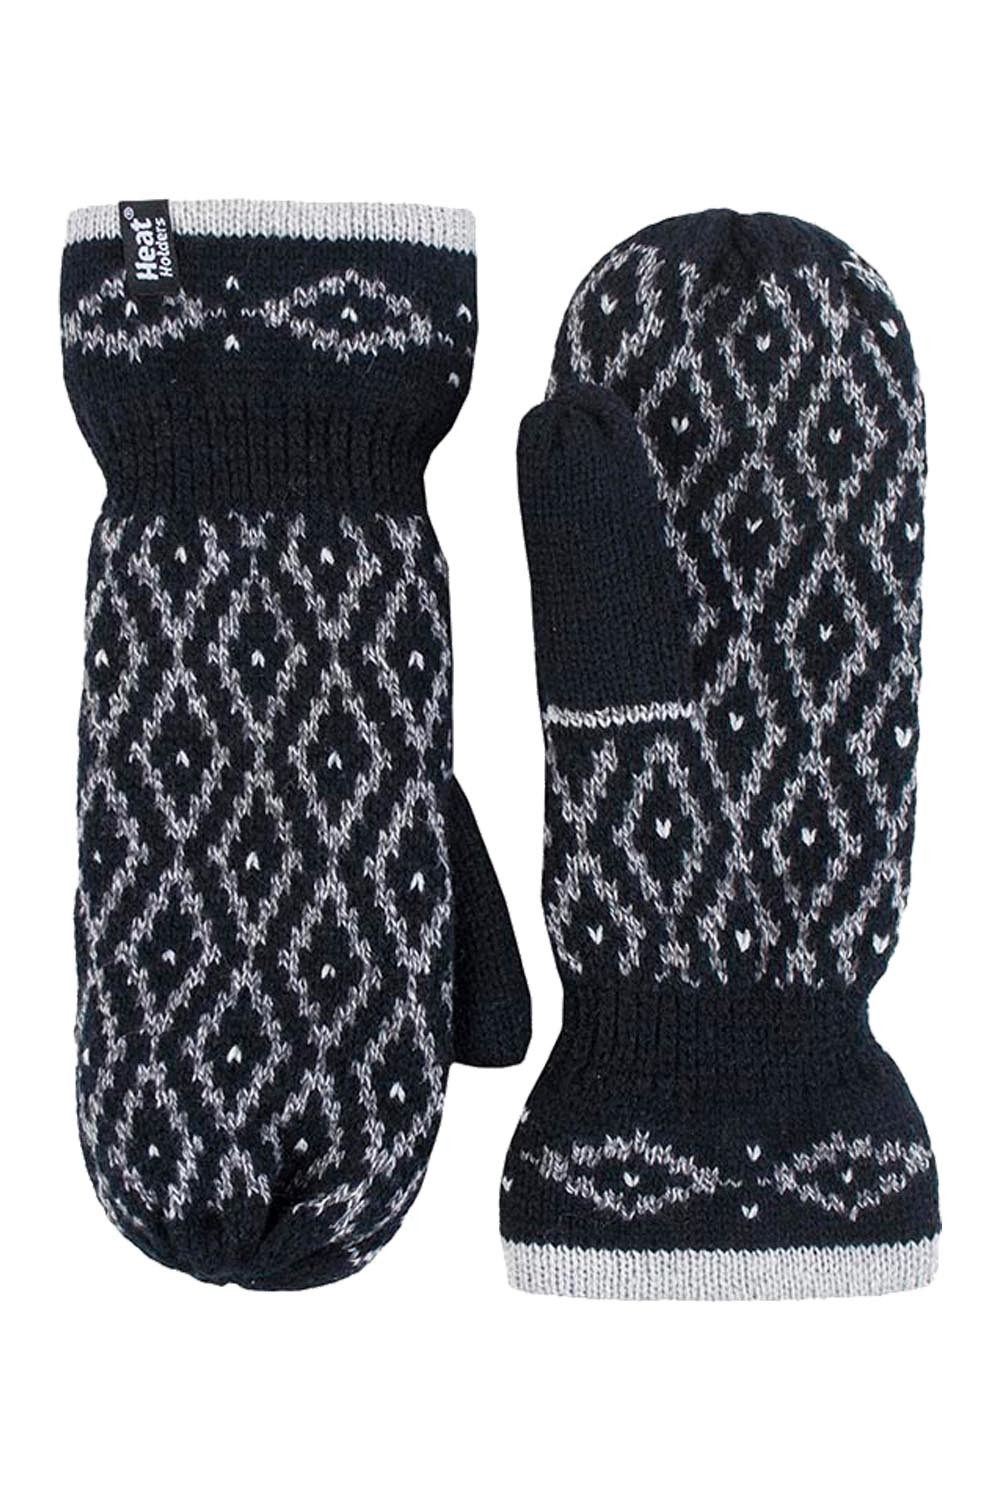 Womens Winter Thermal Fleece Lined Mittens -